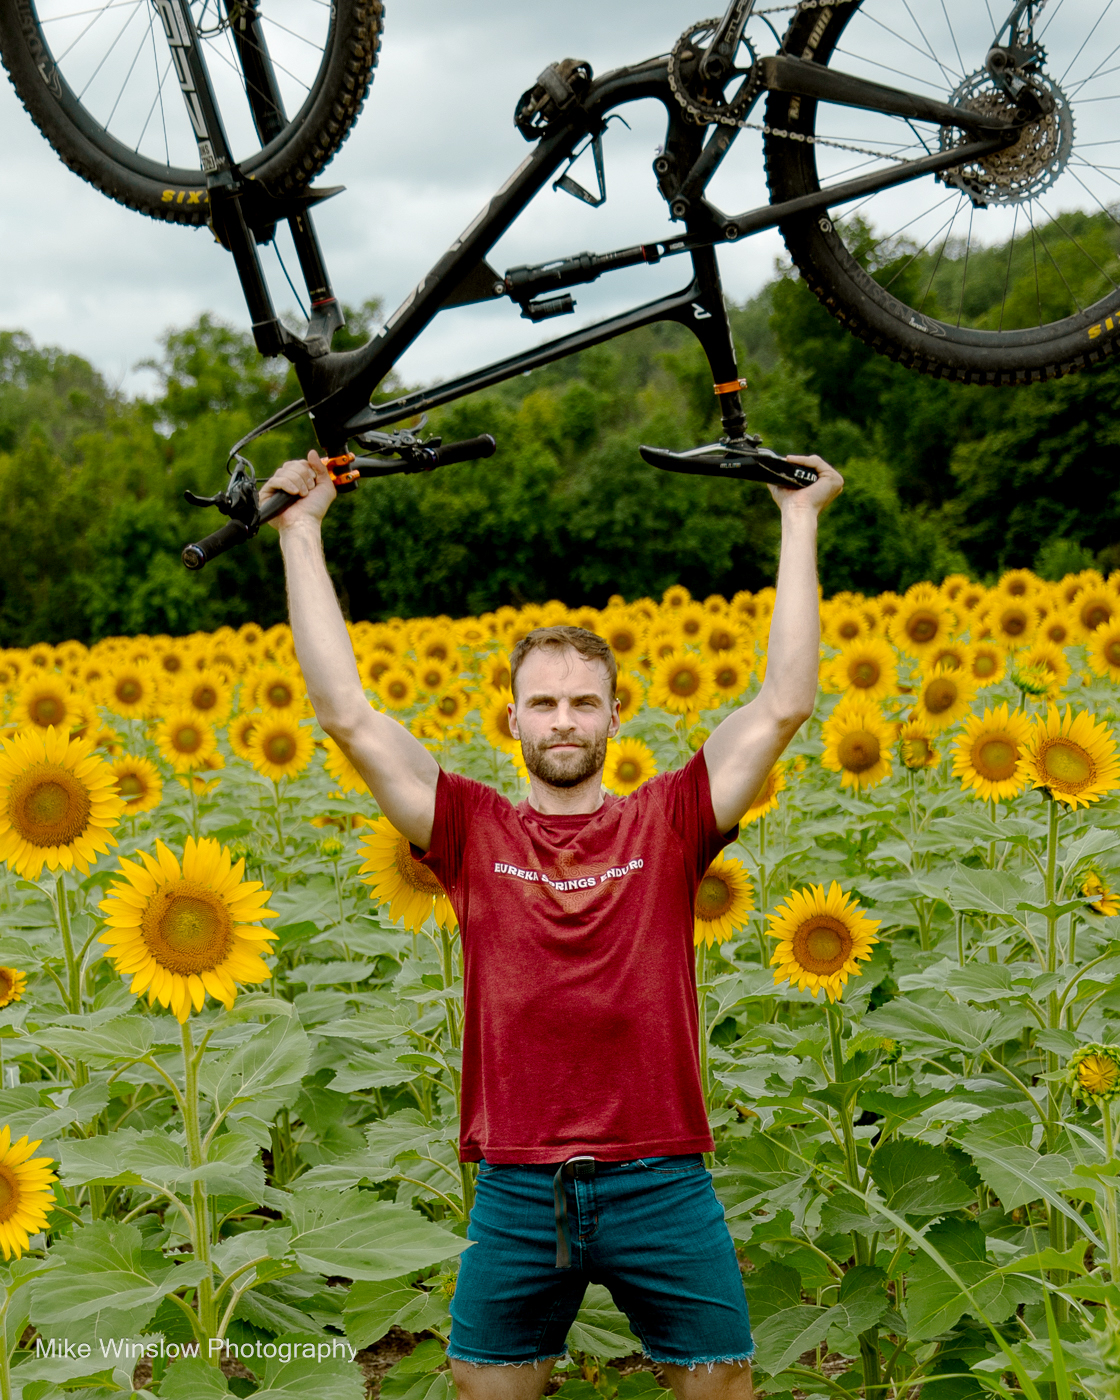 Man in sunflowers with bike